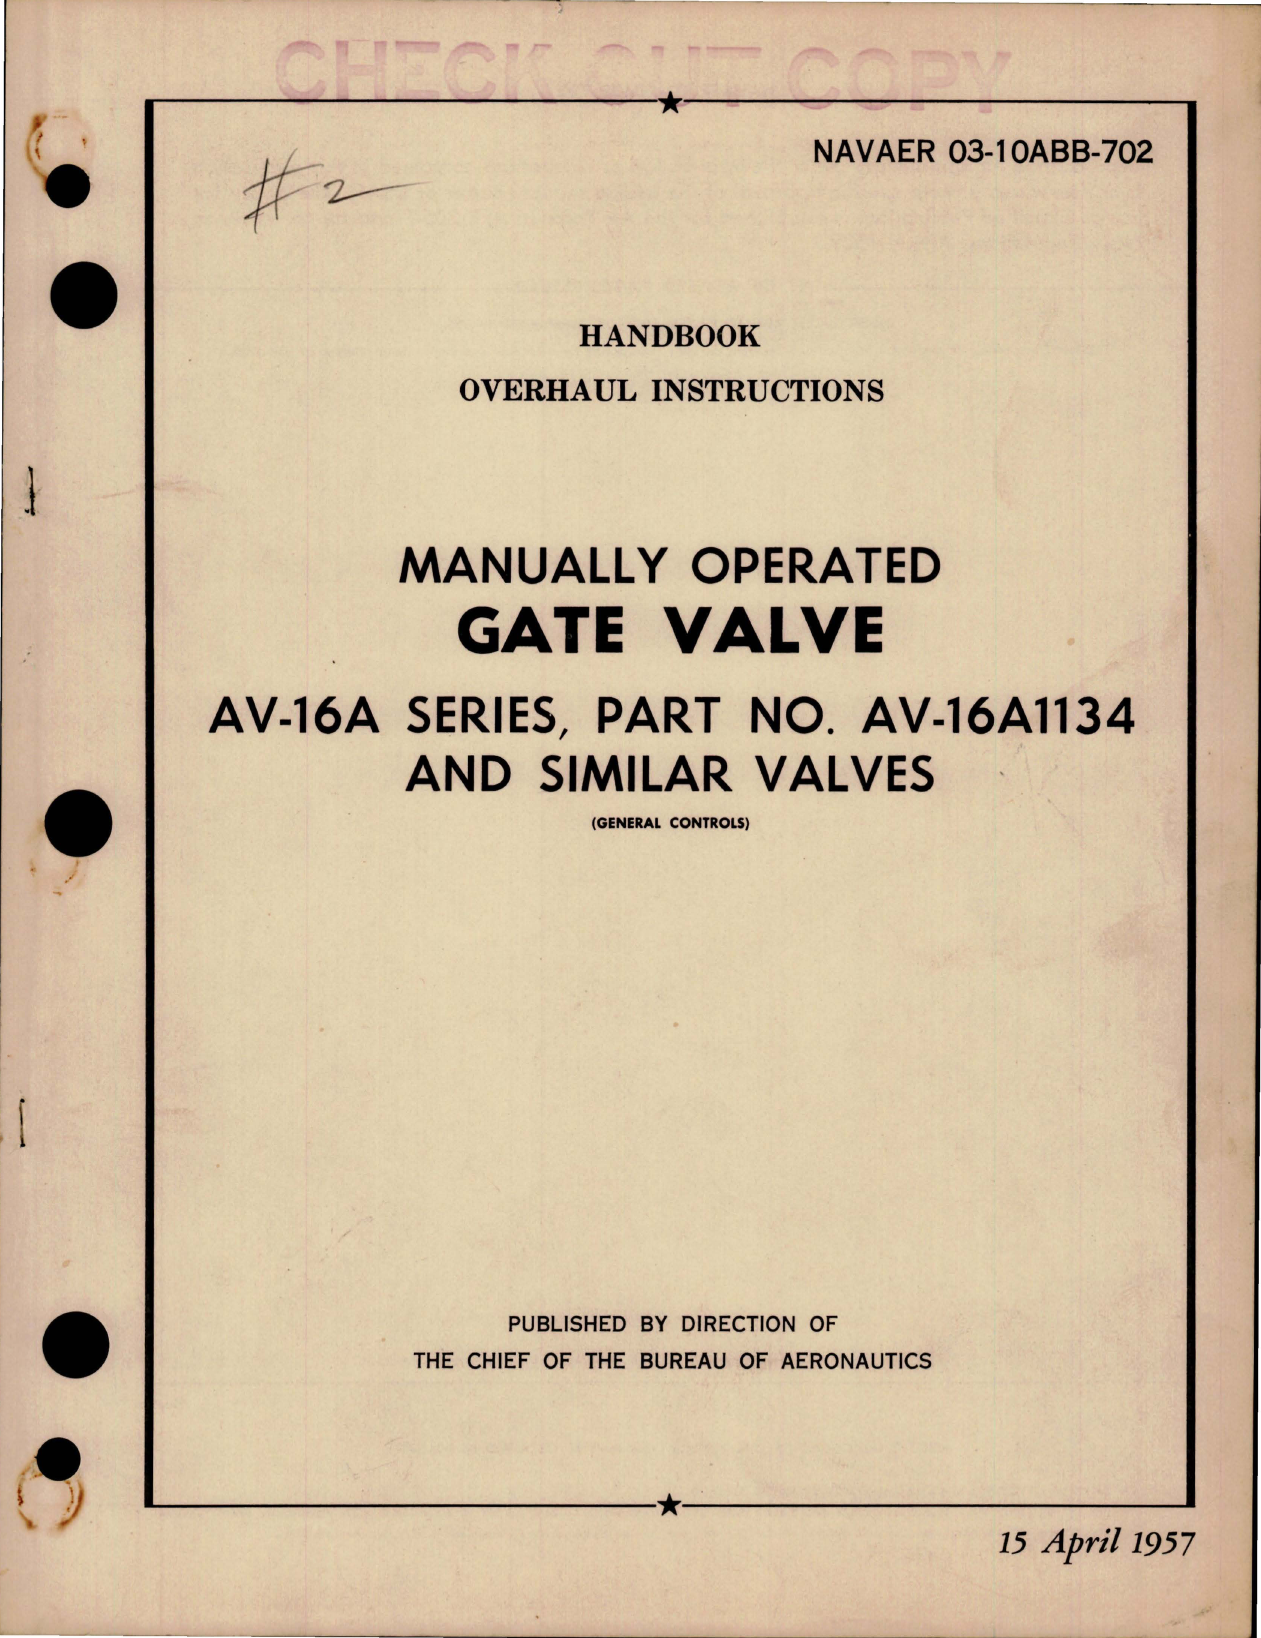 Sample page 1 from AirCorps Library document: Overhaul Instructions for Manually Operated Gate Valve - AV-16A Series - Part AV-16A1134 